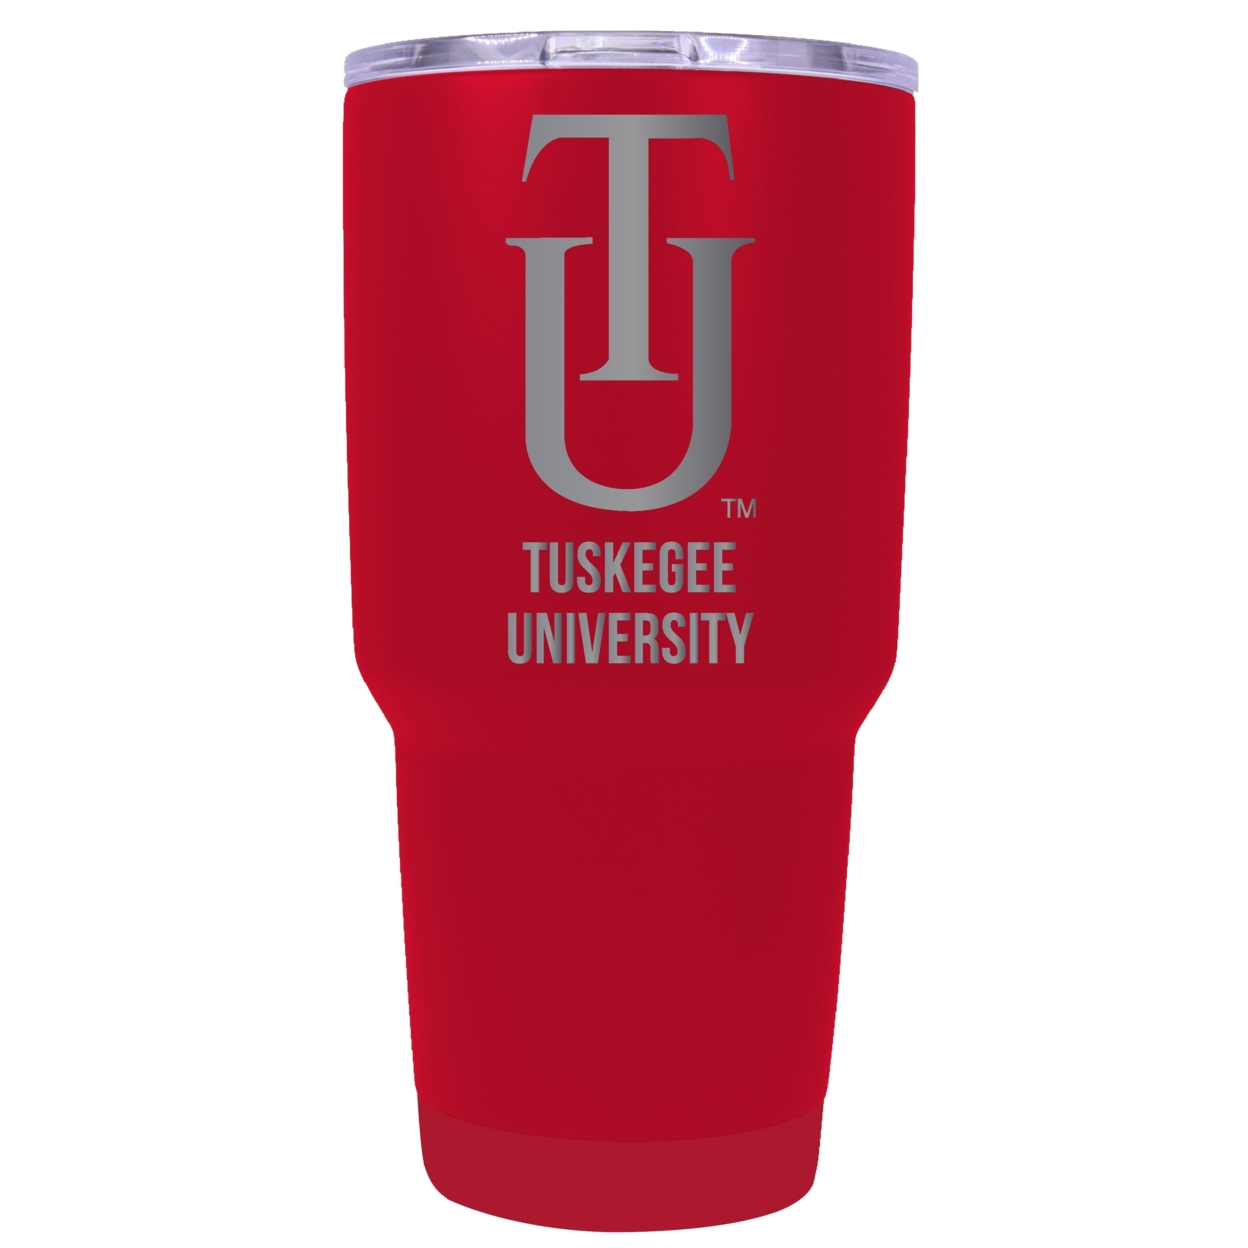 Tuskegee University 24 Oz Laser Engraved Stainless Steel Insulated Tumbler - Choose Your Color. - Coral